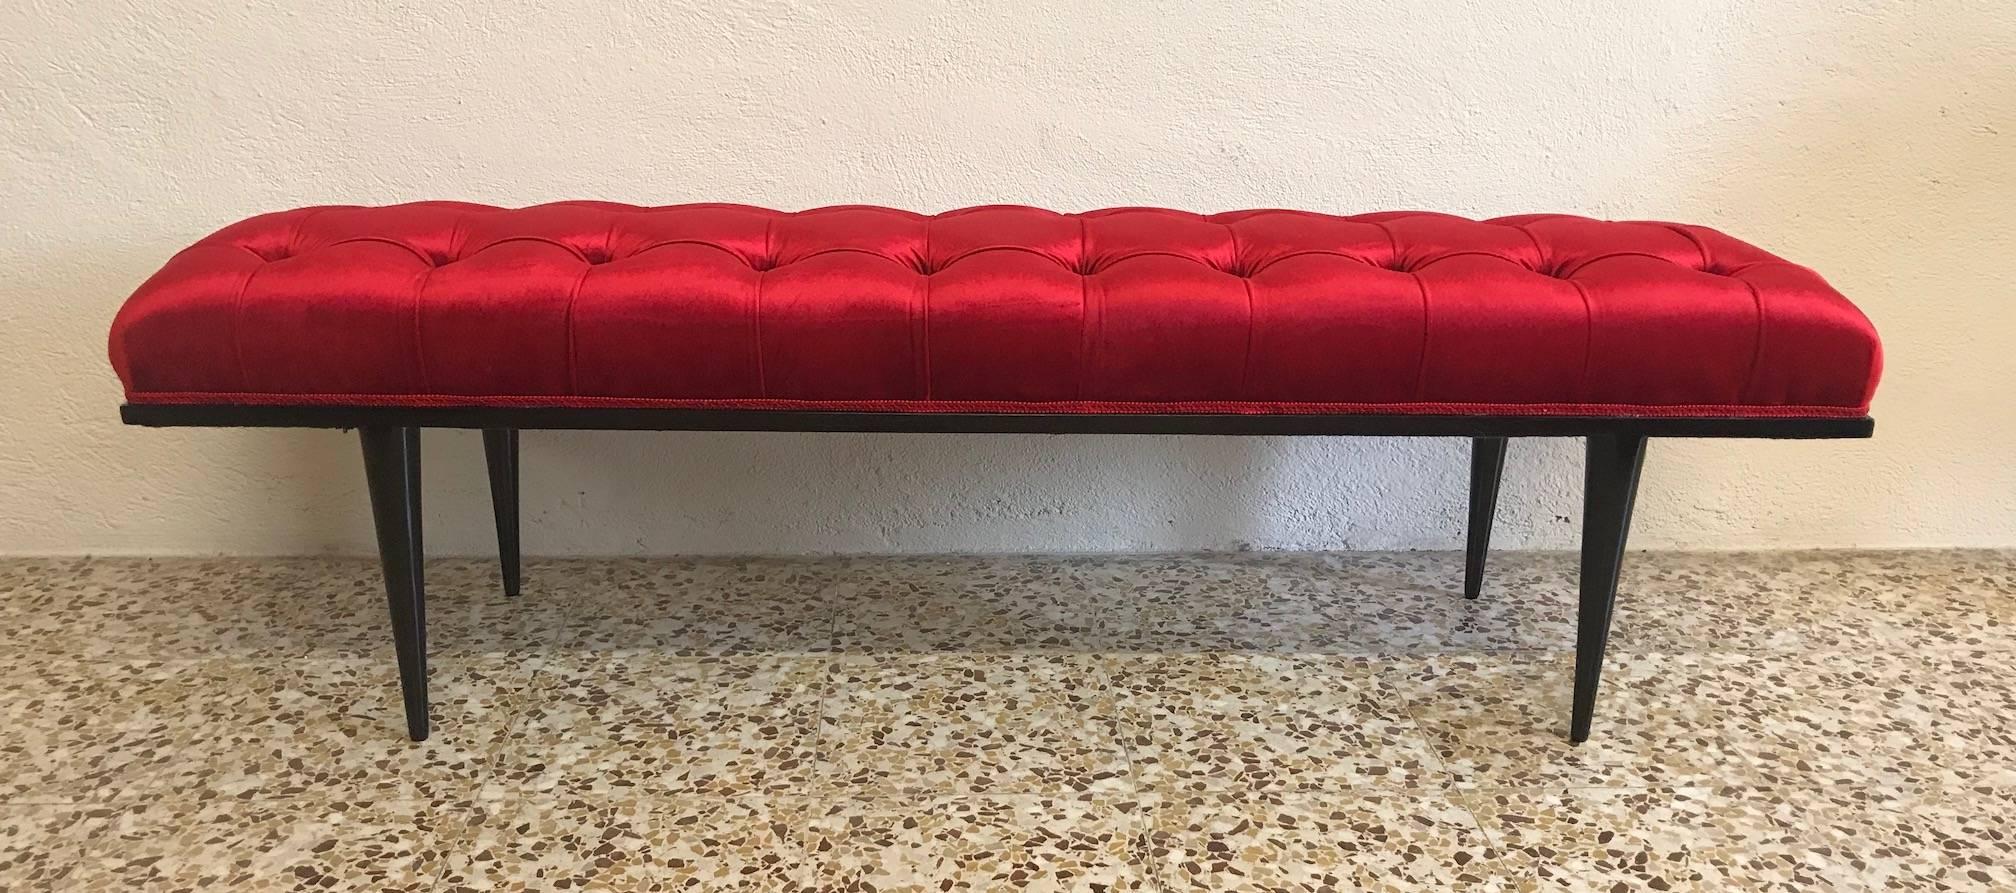 Elegant Art Deco black lacquered bench from the 1940s.
Newly upholstered in a very high textile velvet red.